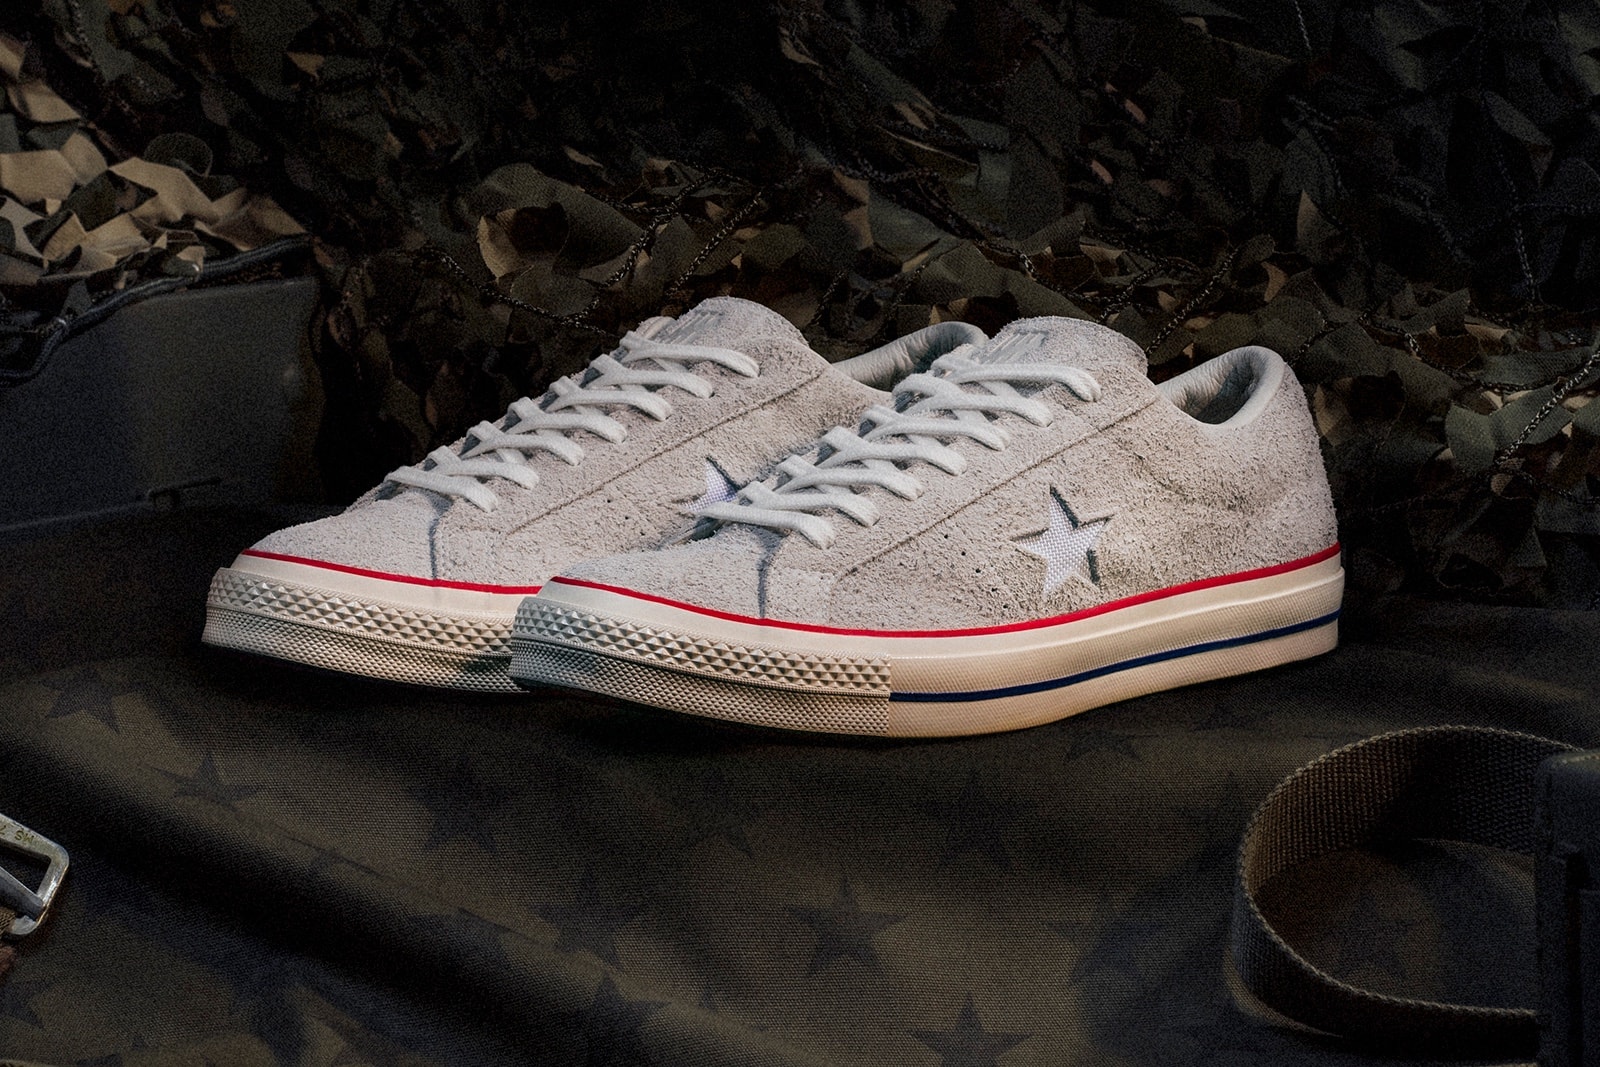 UNDEFEATED x Converse One Star OX Suede スエード